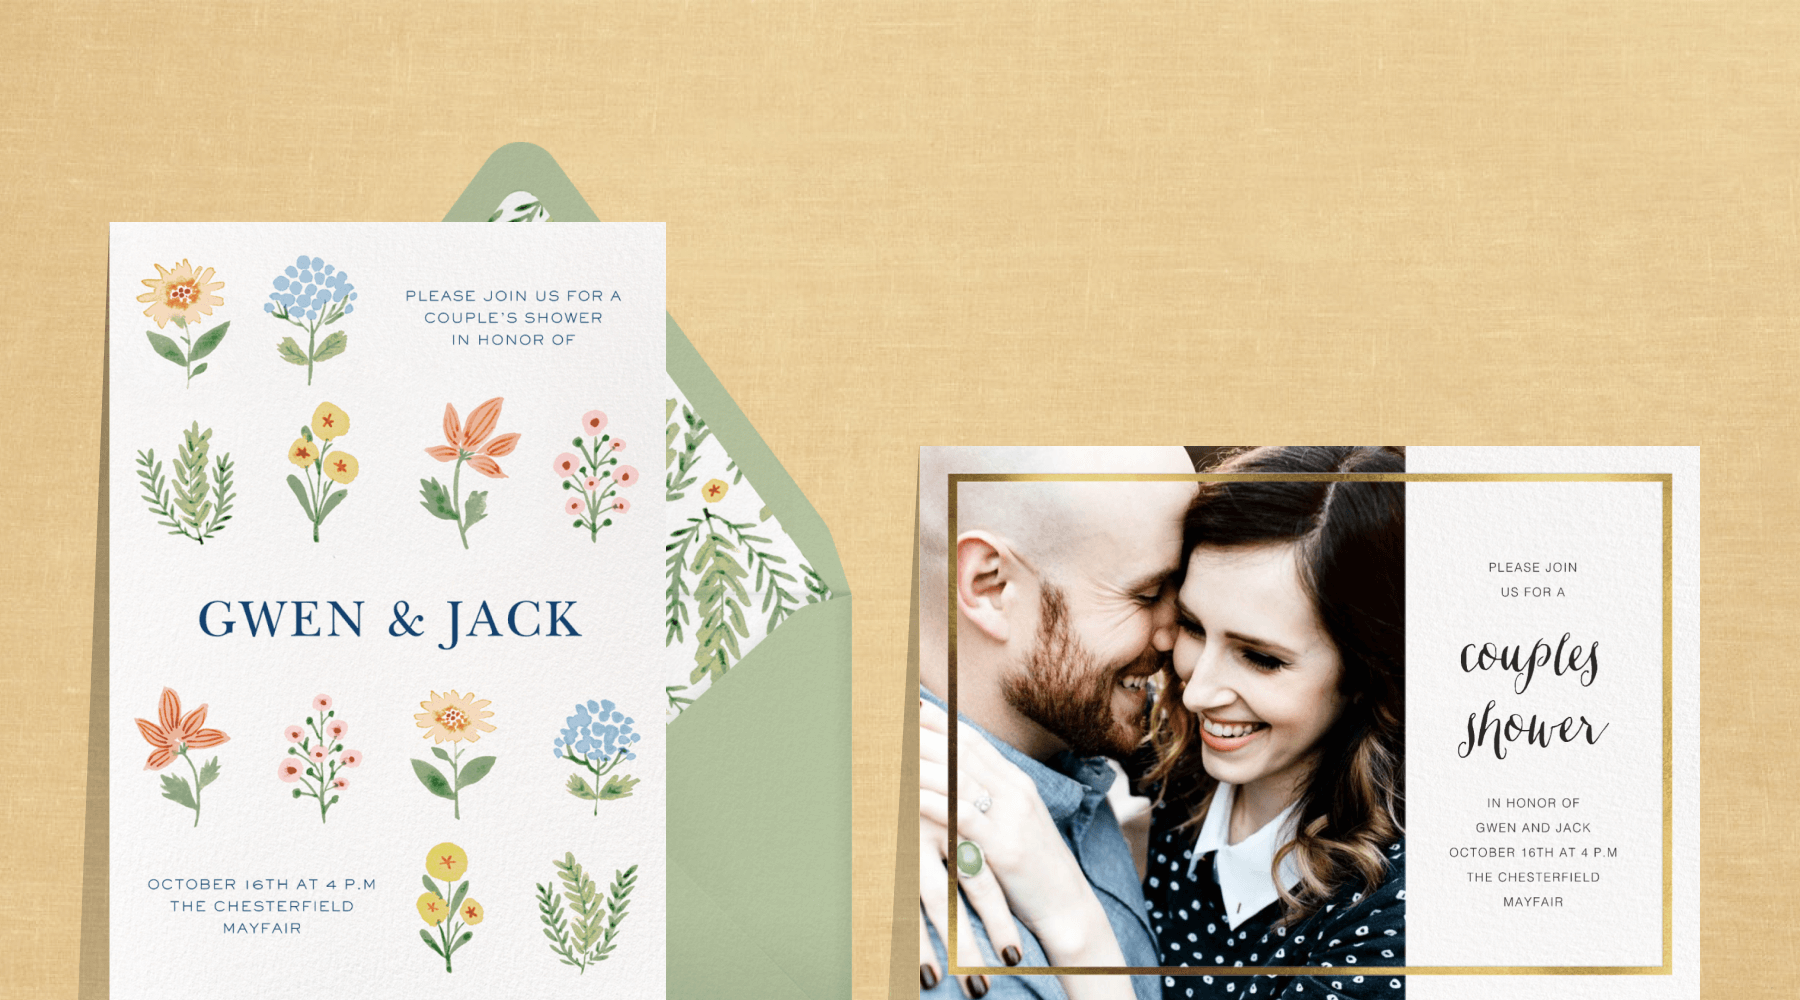 An invitation with colorful flowering plants; an invitation with a couple embracing and a gold foil border